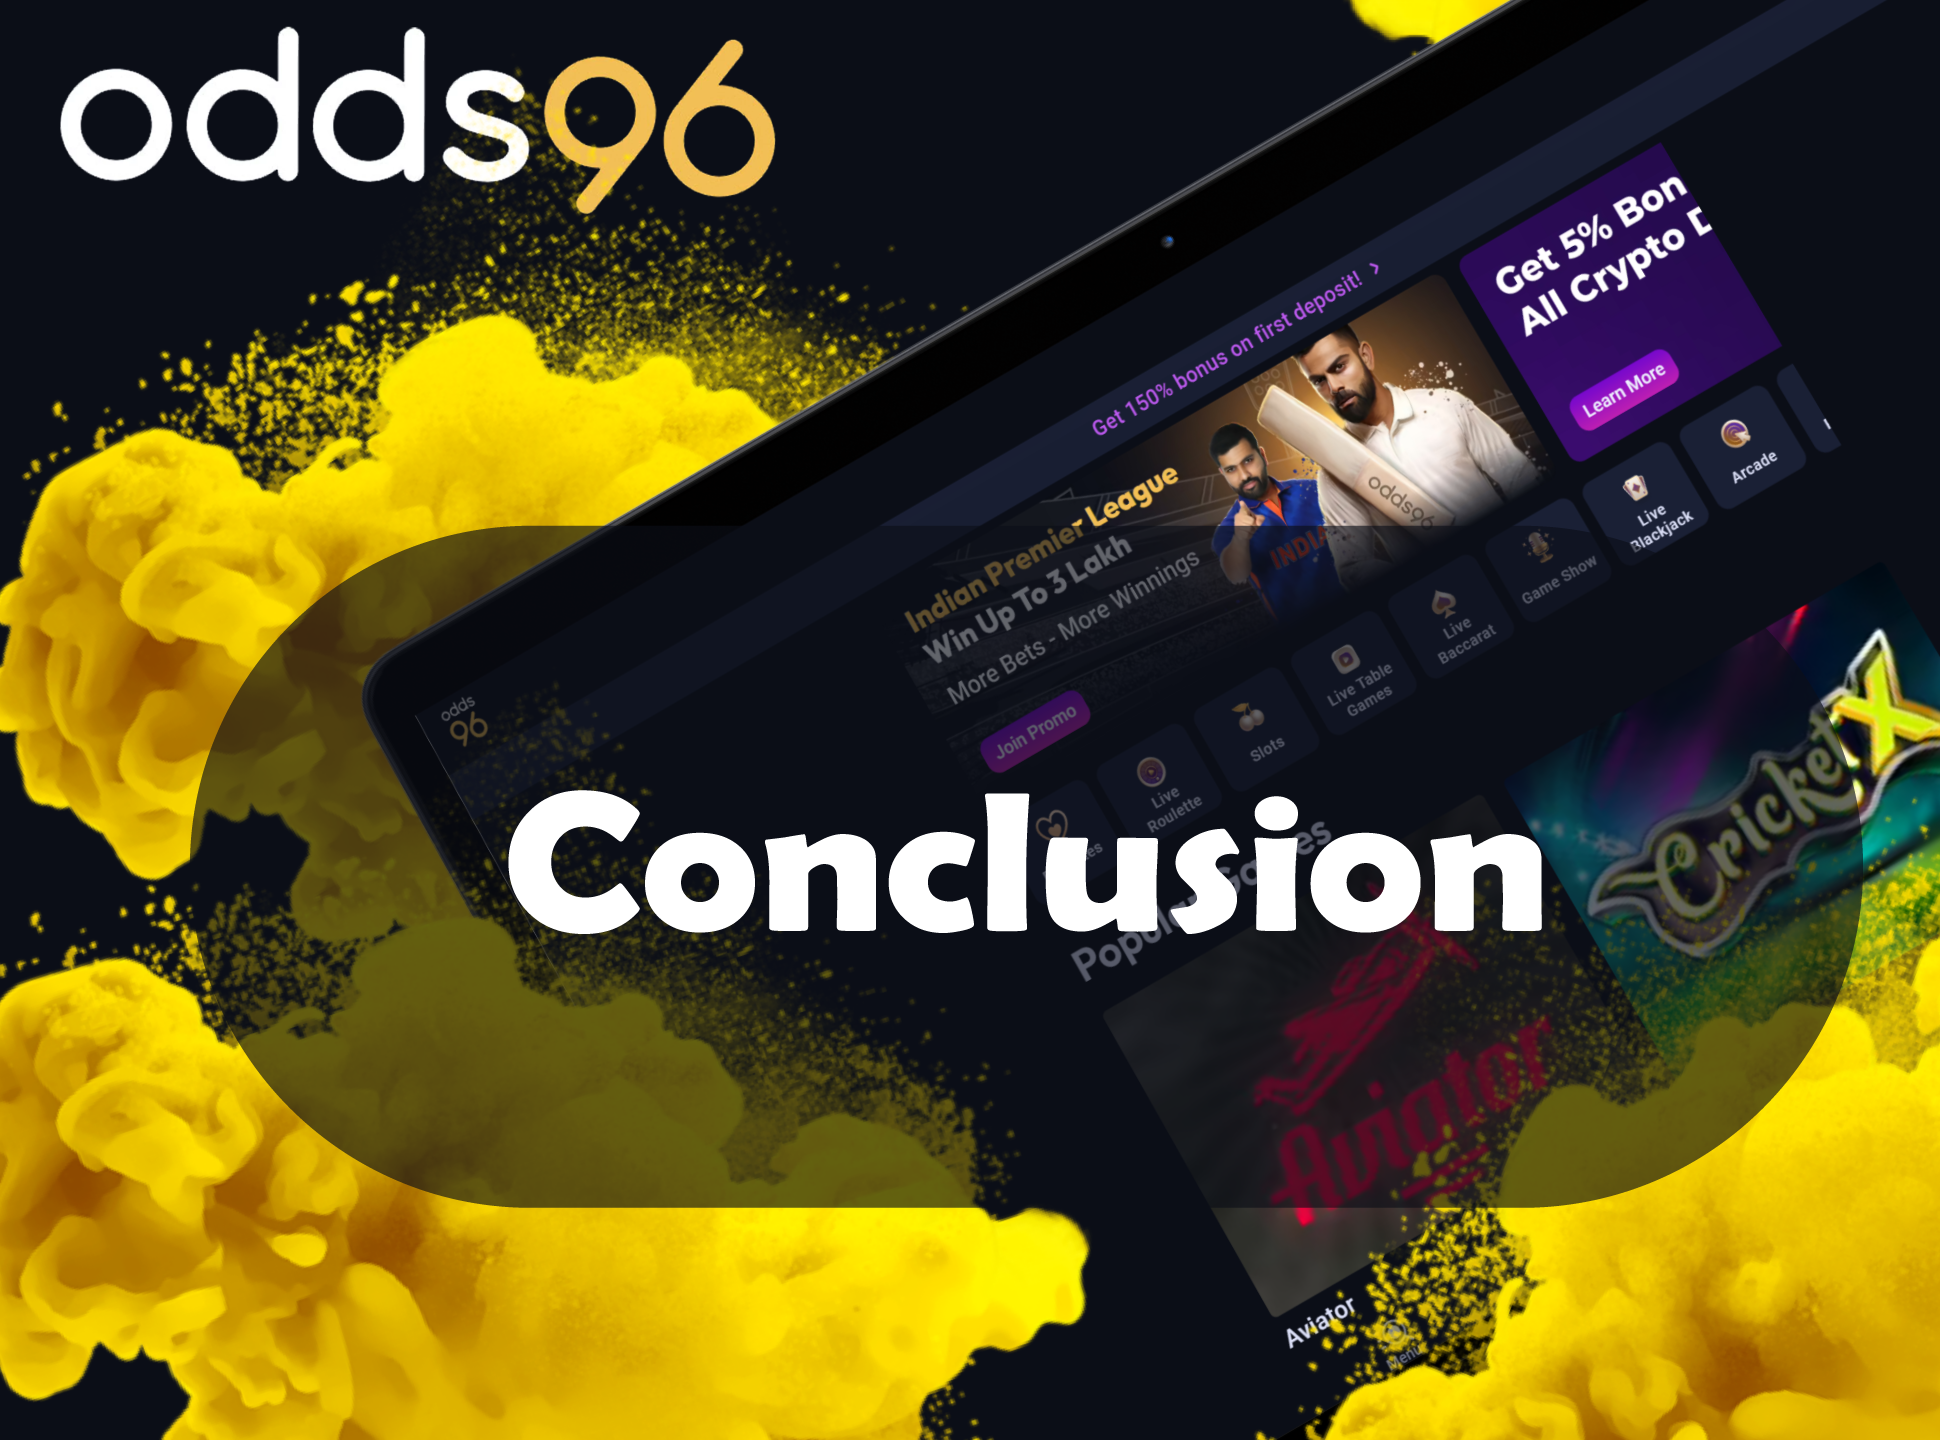 Odds96 betting company is a great place to making bets and play casino games.